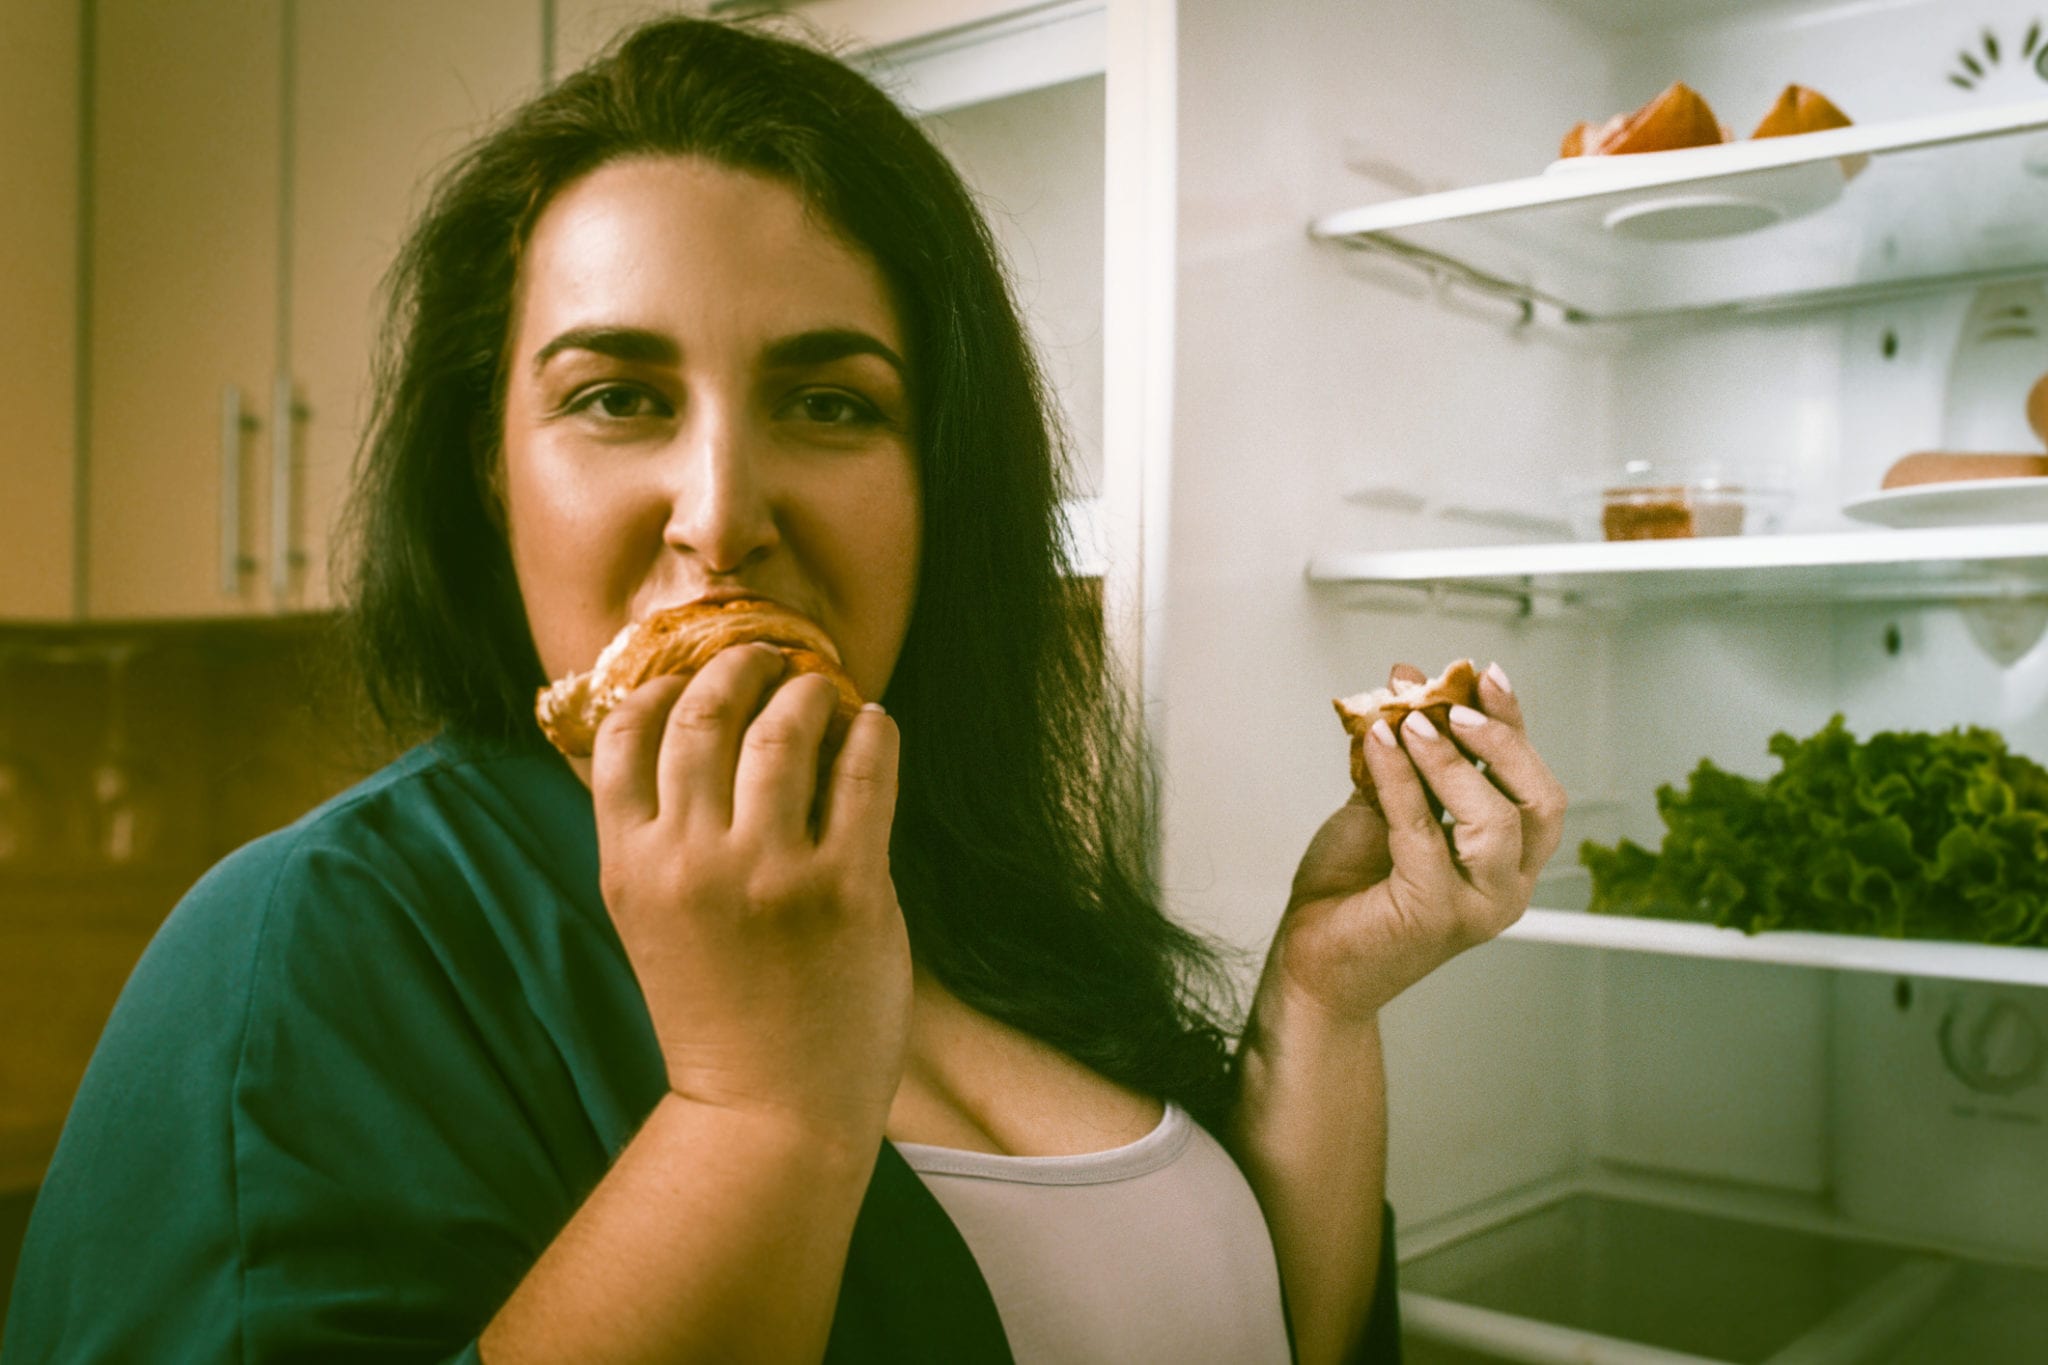 Woman eating fattening food her ignoring doctor's weight loss advice